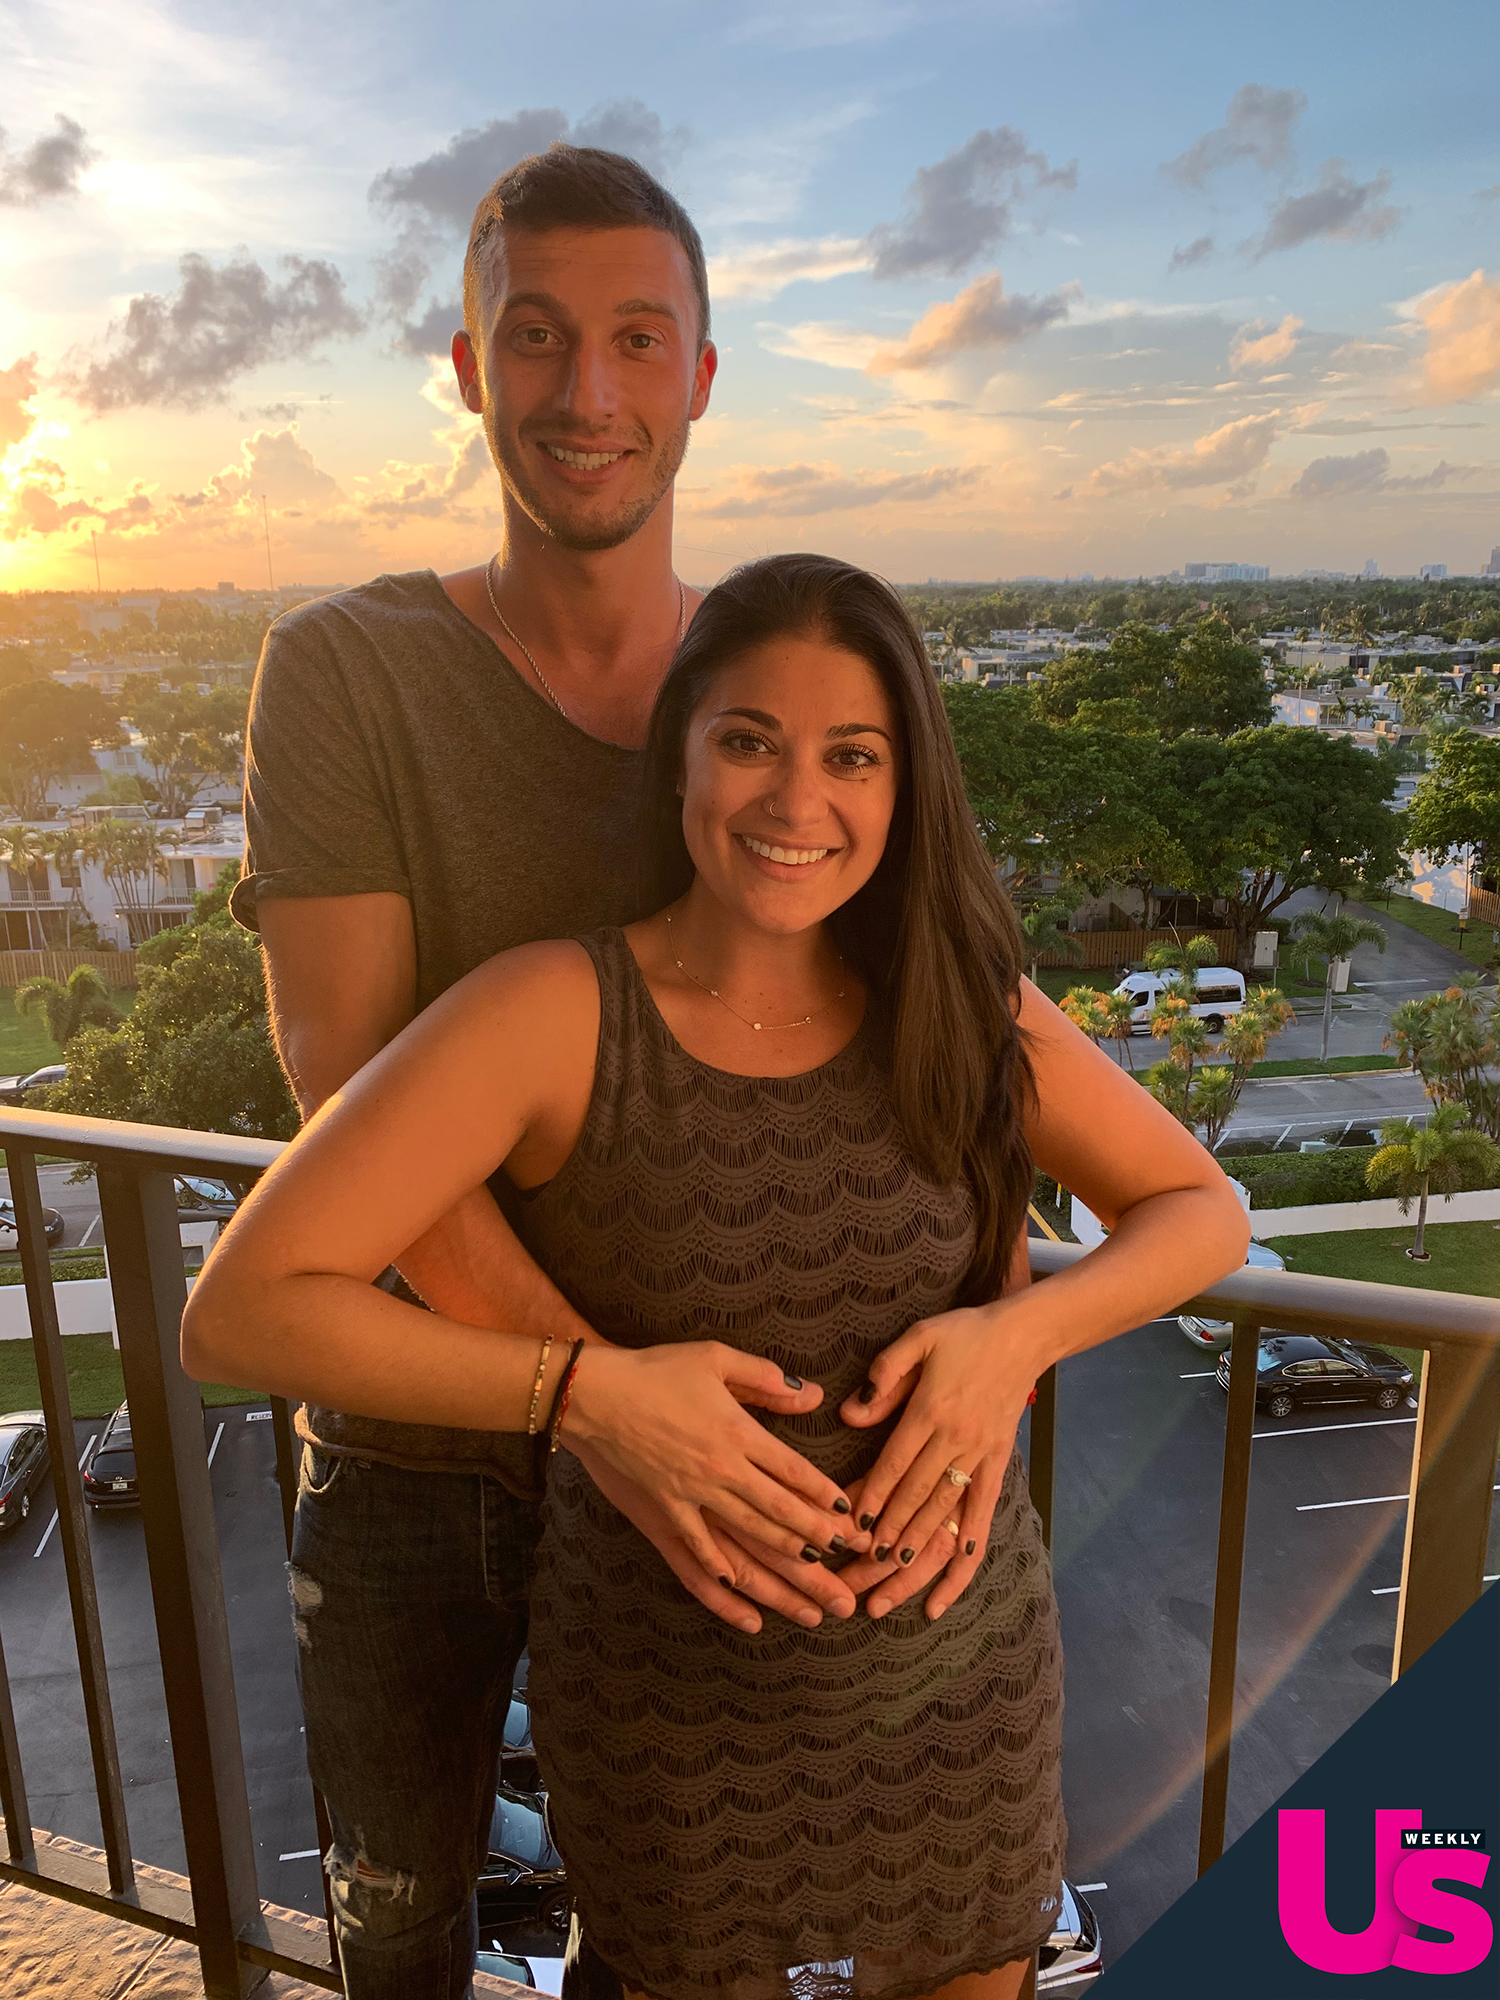 Pregnant! 90 Day Fiance's Loren and Alexei Are Expecting Their First